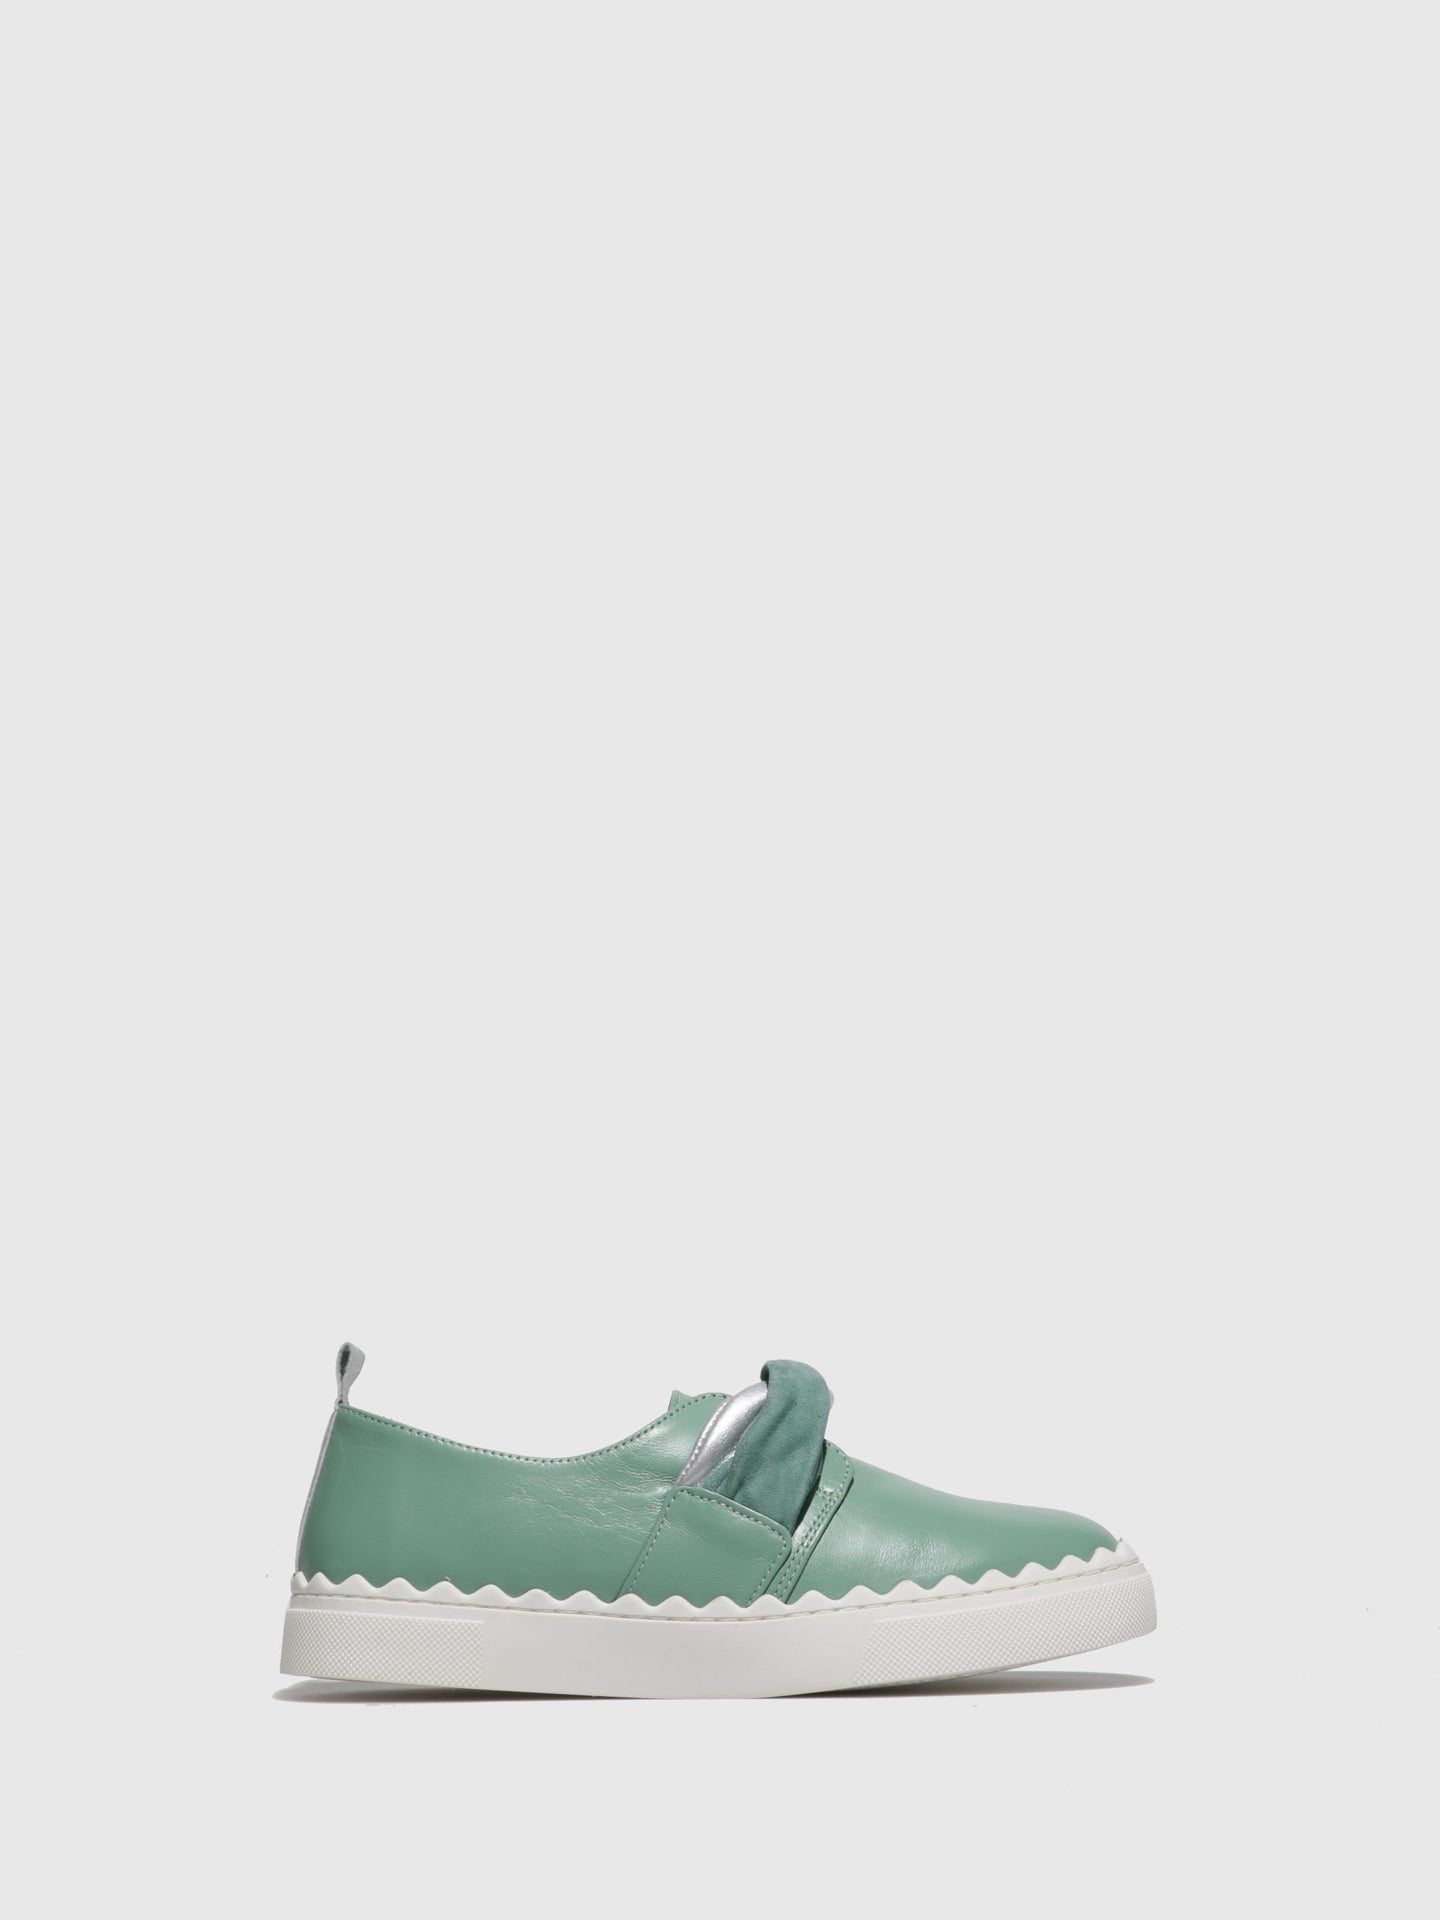 JJ Heitor Green Leather Slip-on Shoes